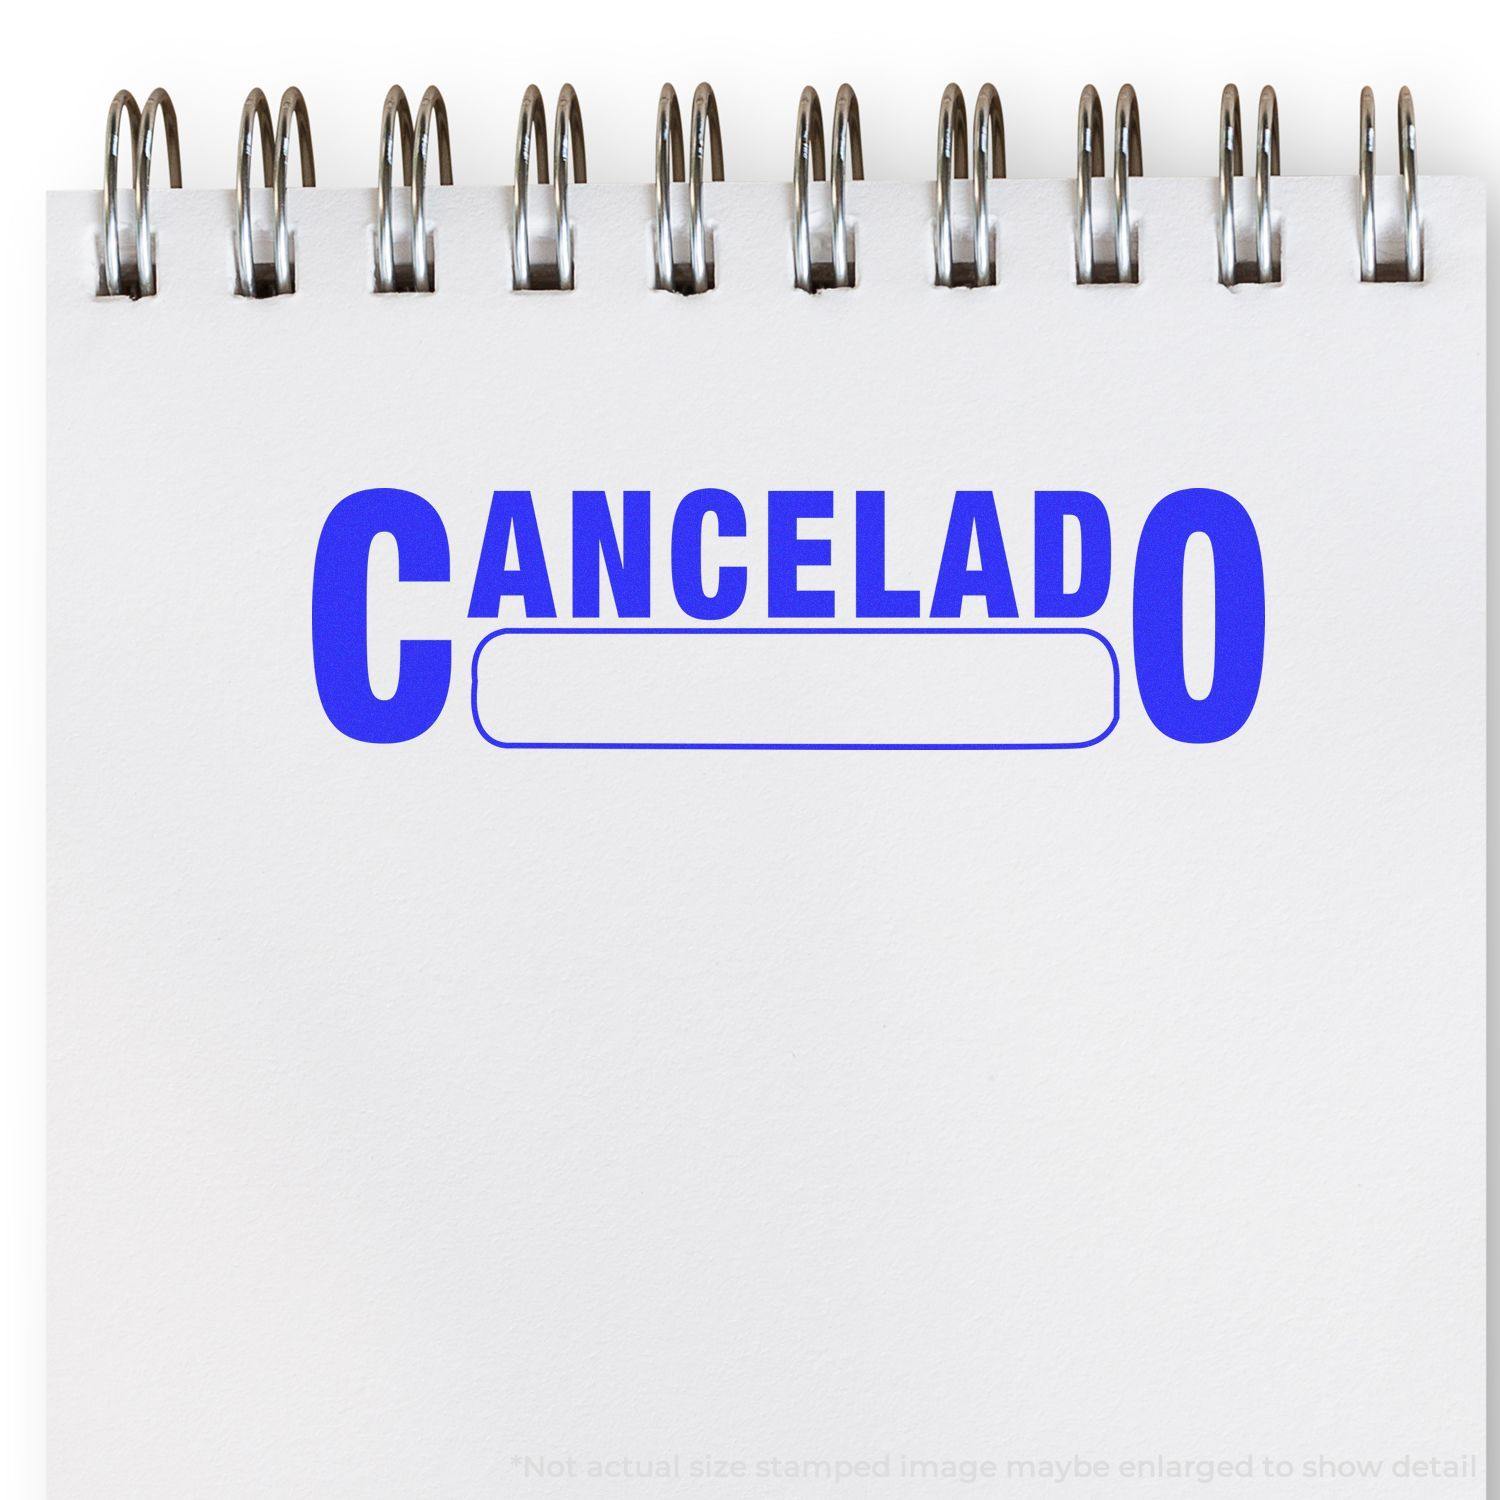 A stock office pre-inked stamp with a stamped image showing how the text "CANCELADO" with a box is displayed after stamping.